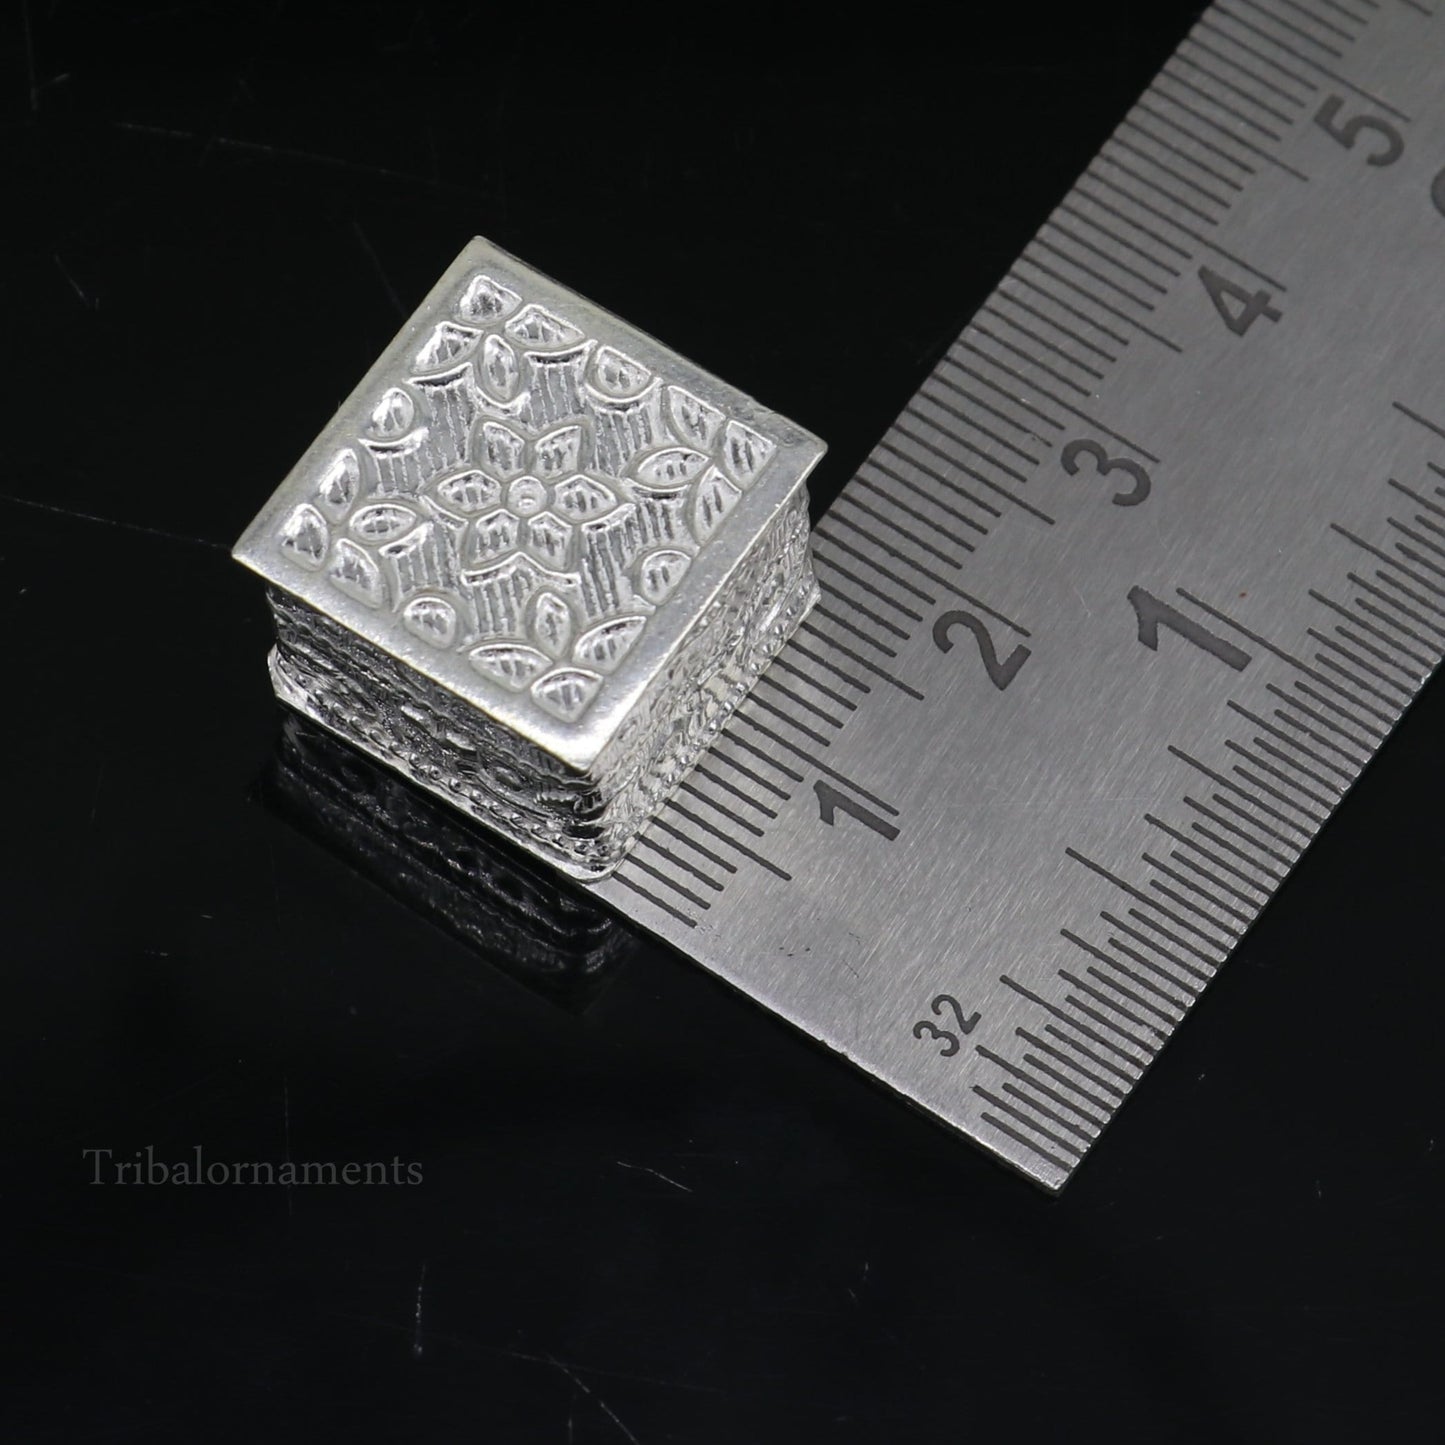 925 sterling silver trinket box, kajal box/casket box bridal square shape box collection, container box, eyeliner box gifting art stb165 - TRIBAL ORNAMENTS